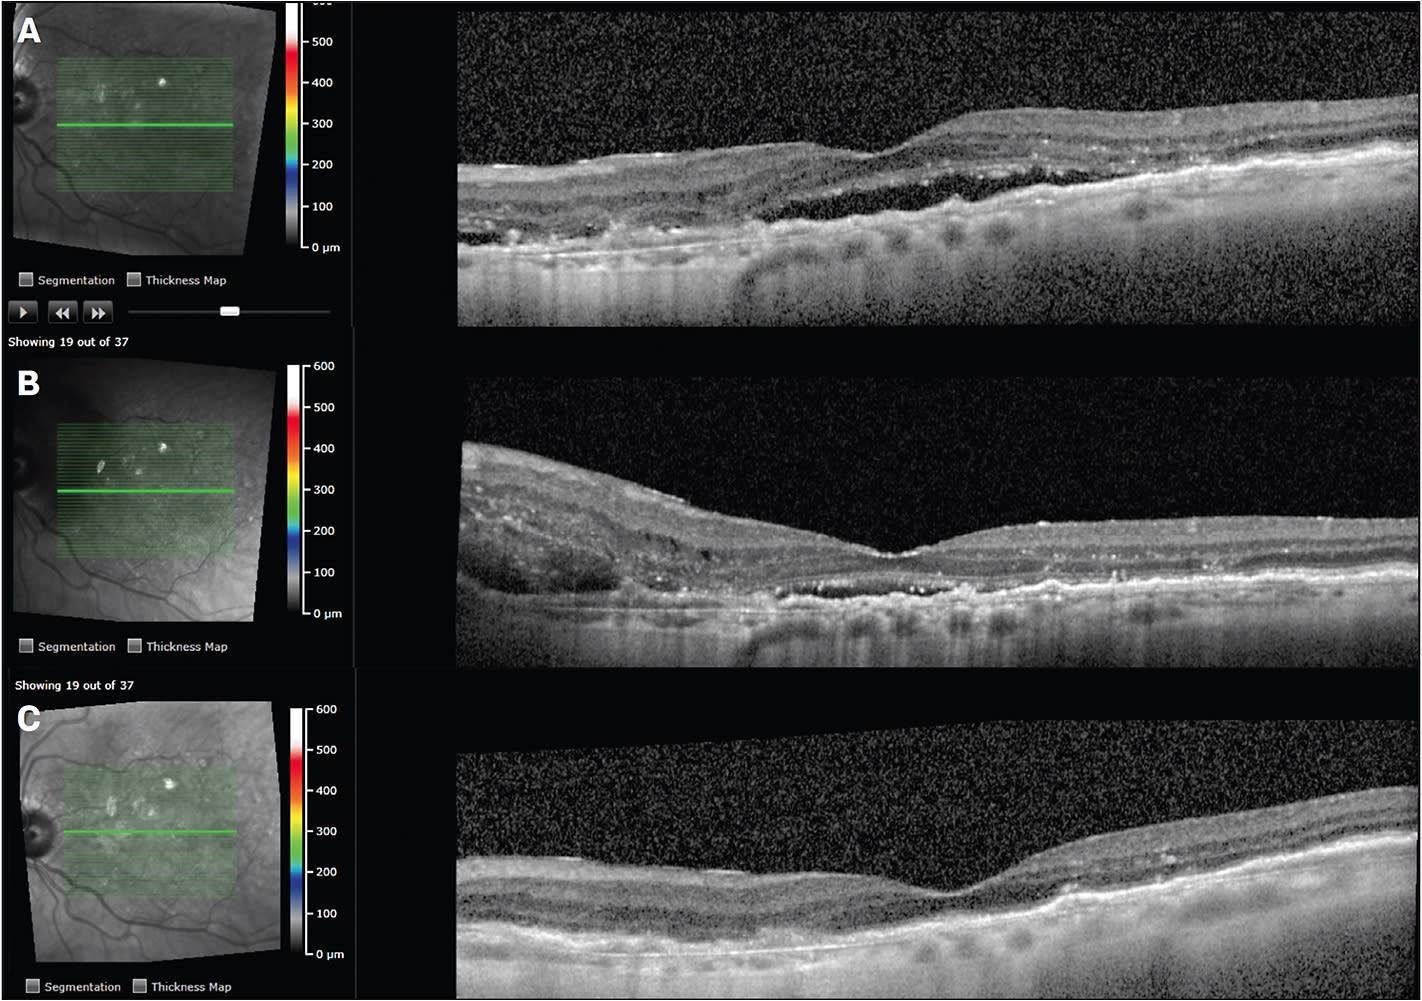 Figure 1. OCT showing persistent subretinal and intraretinal fluid despite q4 week ranibizumab therapy (A). New subretinal peripapillary hemorrhage prompted a switch to intravitreal aflibercept therapy (B). Resolution of subretinal hemorrhage, subretinal fluid, and intraretinal fluid after 6 doses of intravitreal aflibercept in a treat-and-extend method (C).